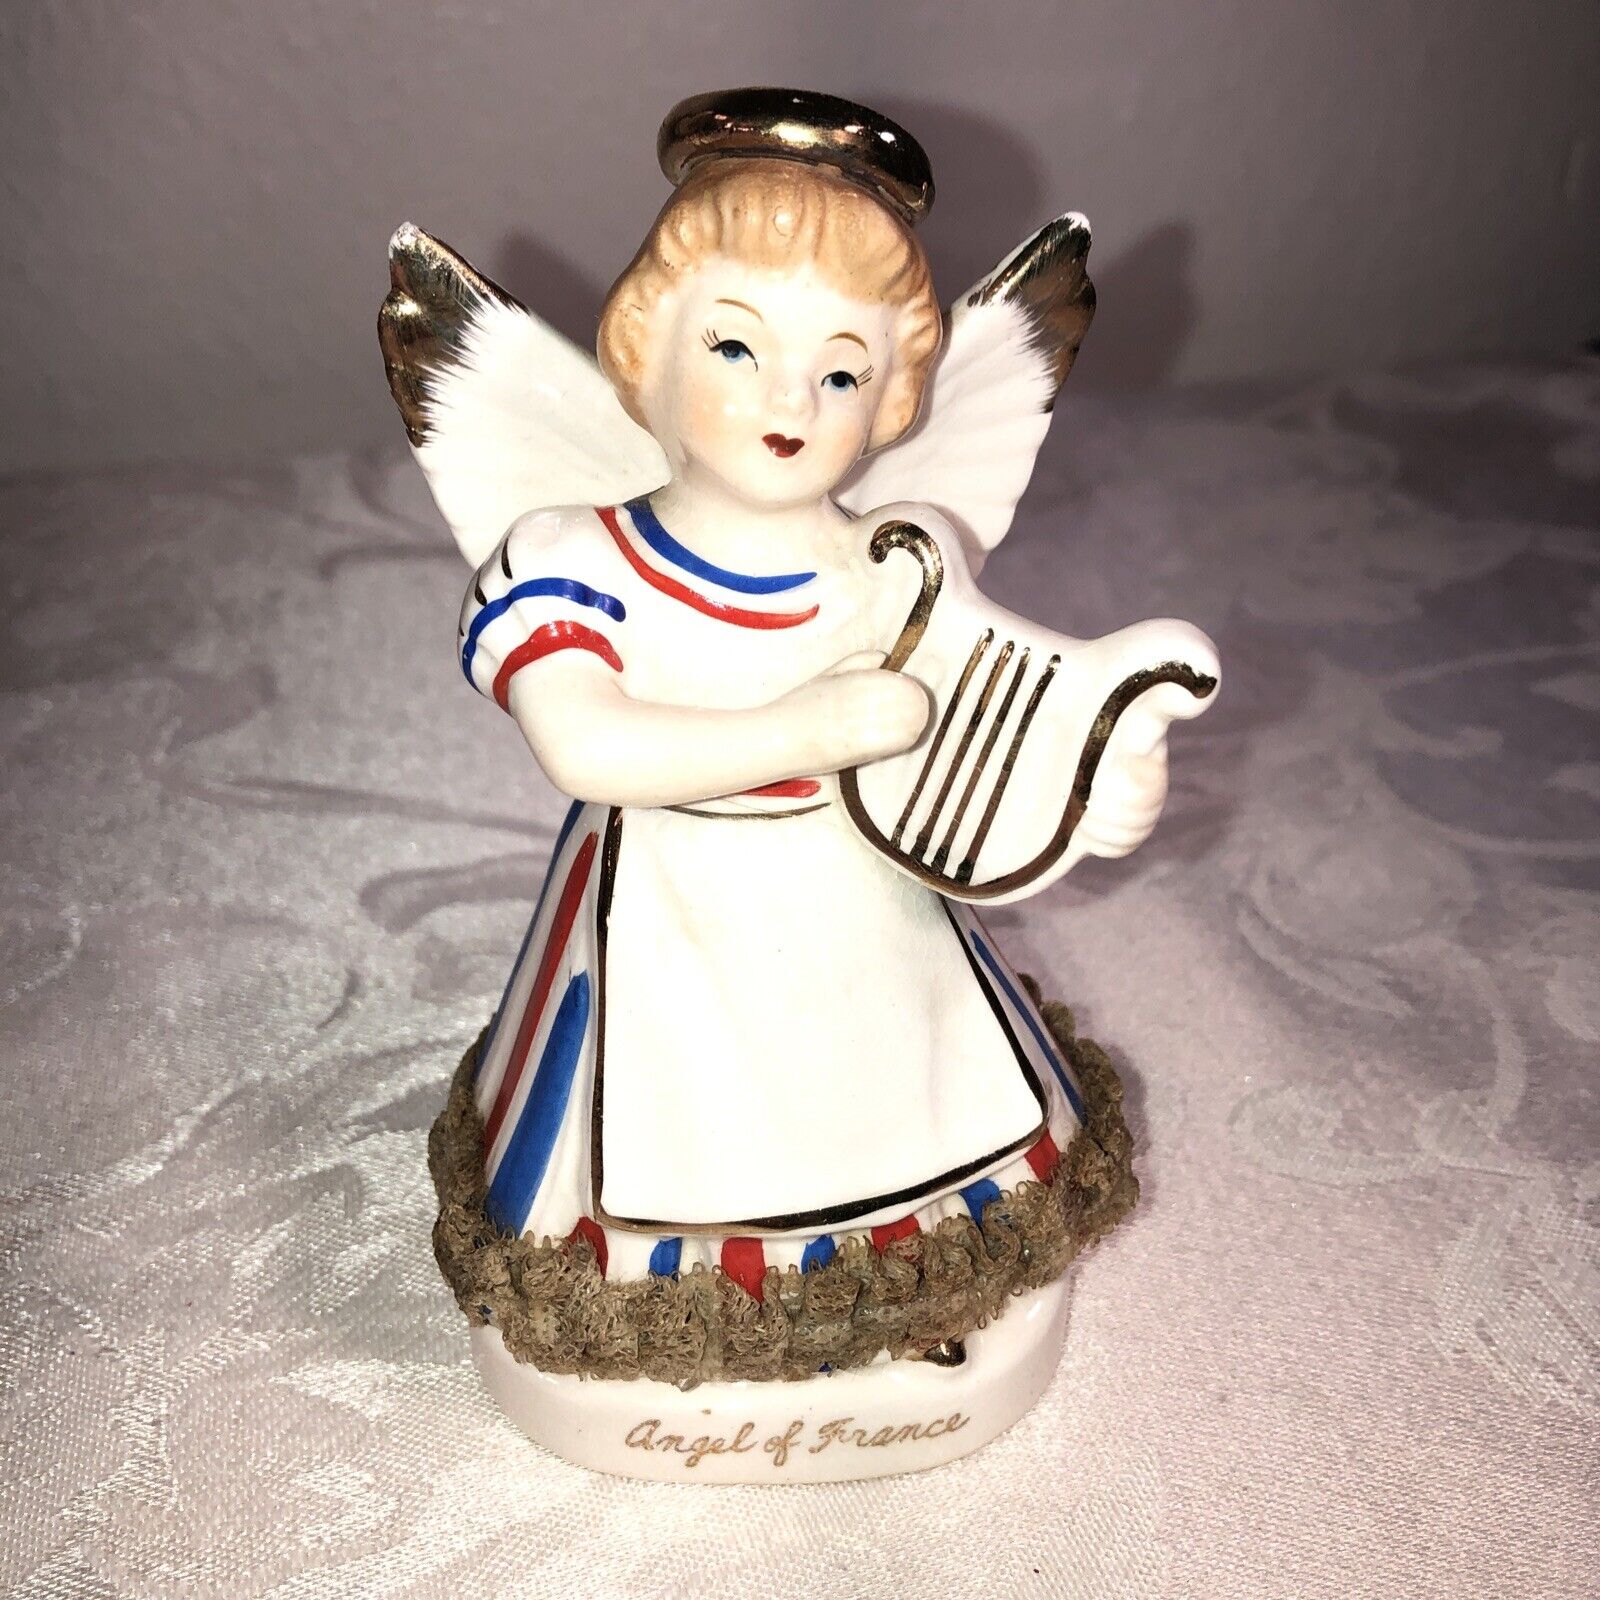 1958 Art Gift Corp. Ceramic Angel Of France Figurine Playing Harp. Preowned.